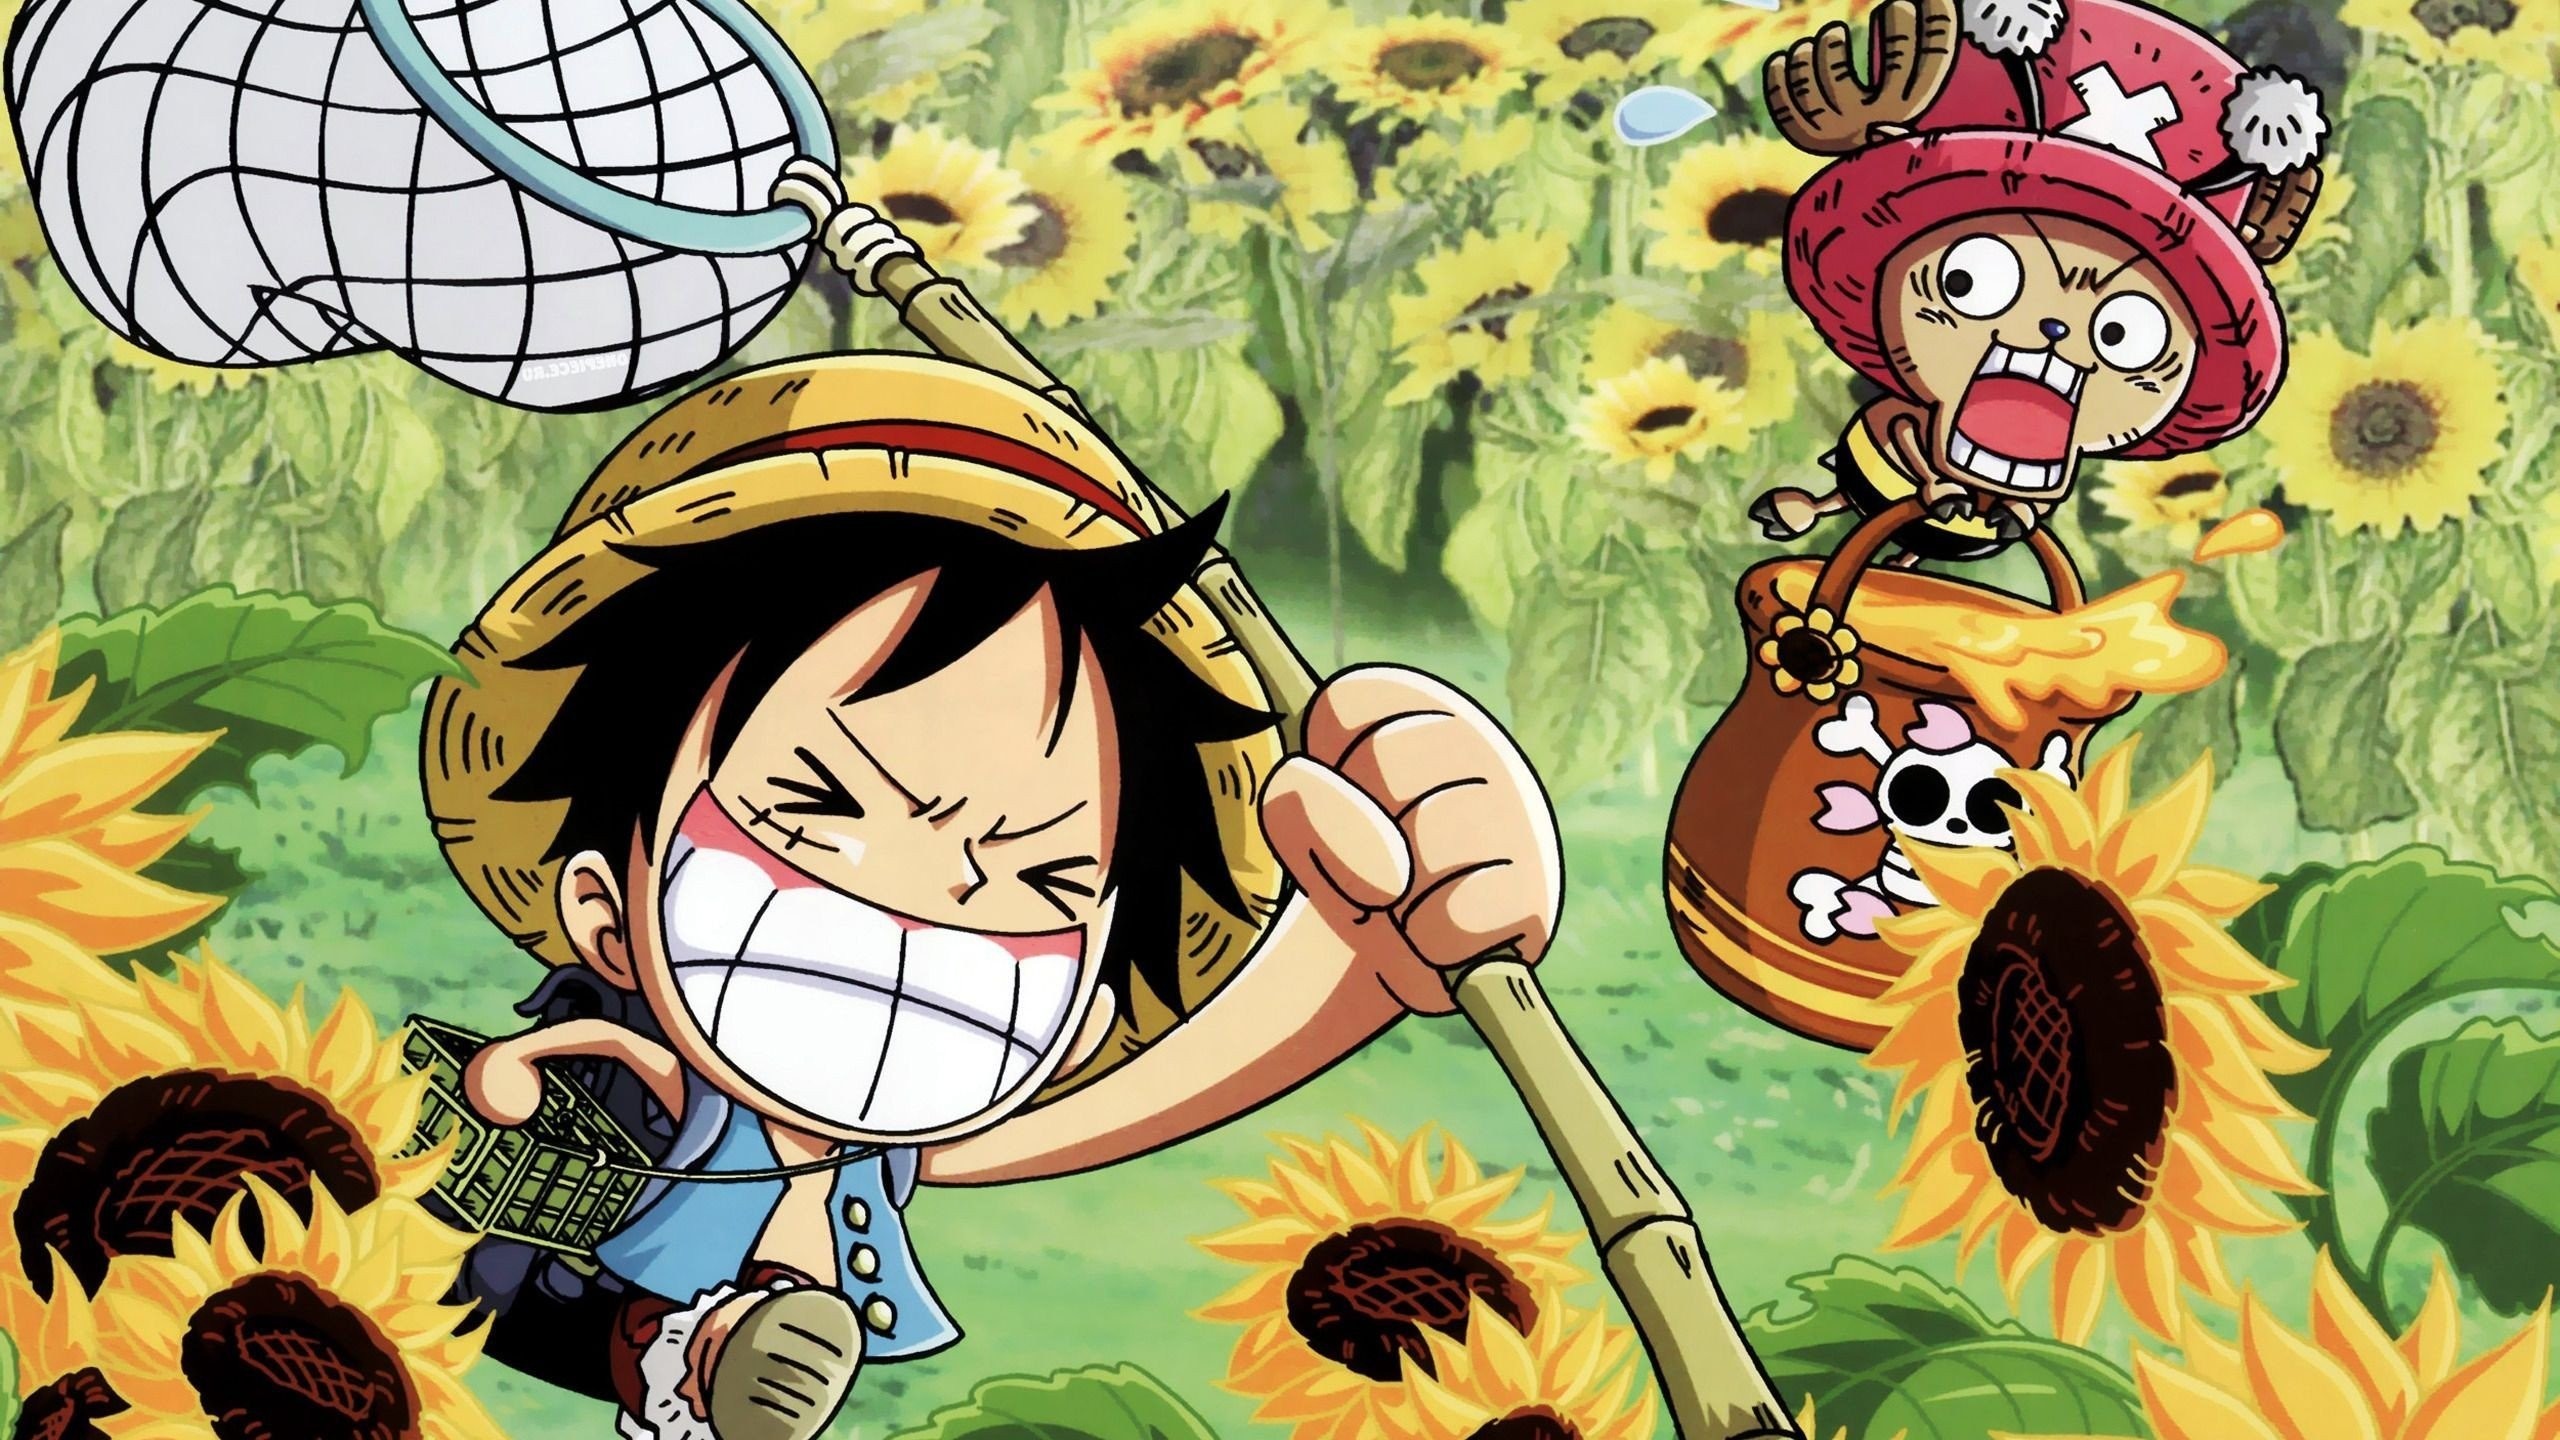 2560x1440 One Piece Wallpapers, HQ Definition One Piece Backgrounds #69XUZ